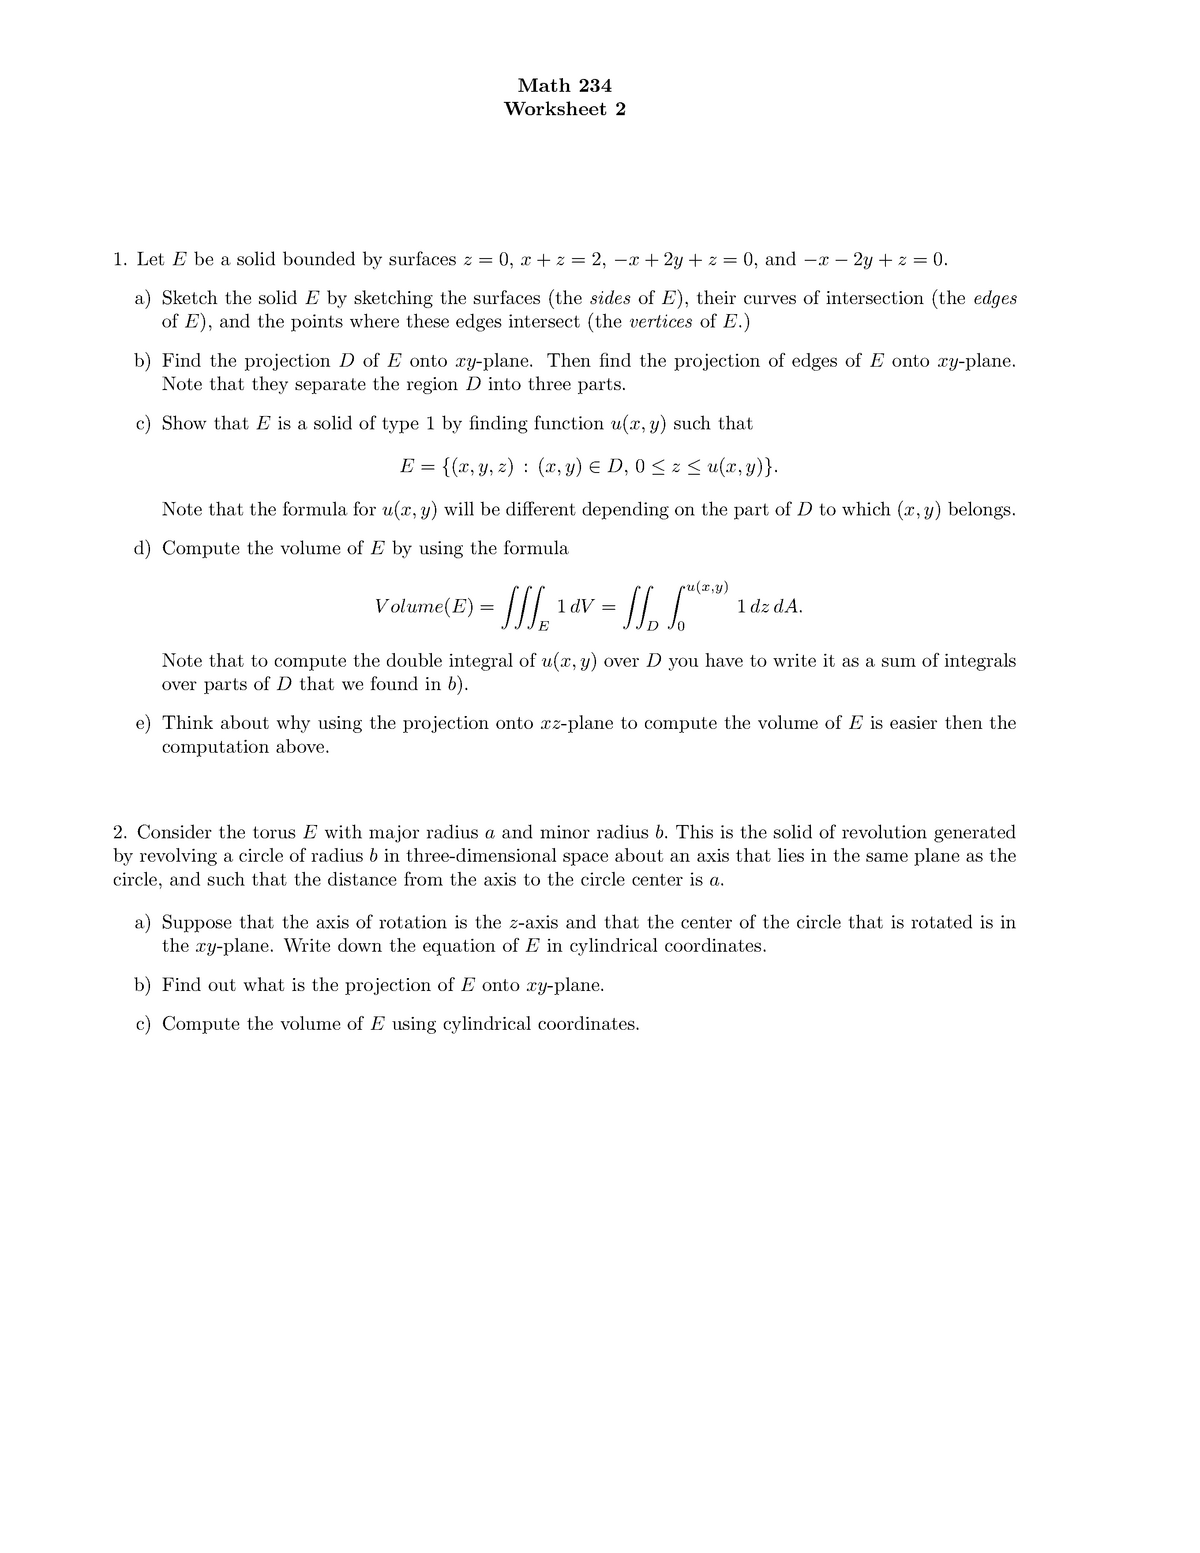 Worksheet 2v2 Let E Be A Solid Bounded Surfaces Z 0 X Z 2 2y Z 0 And 2y Z 0 A Sketch The